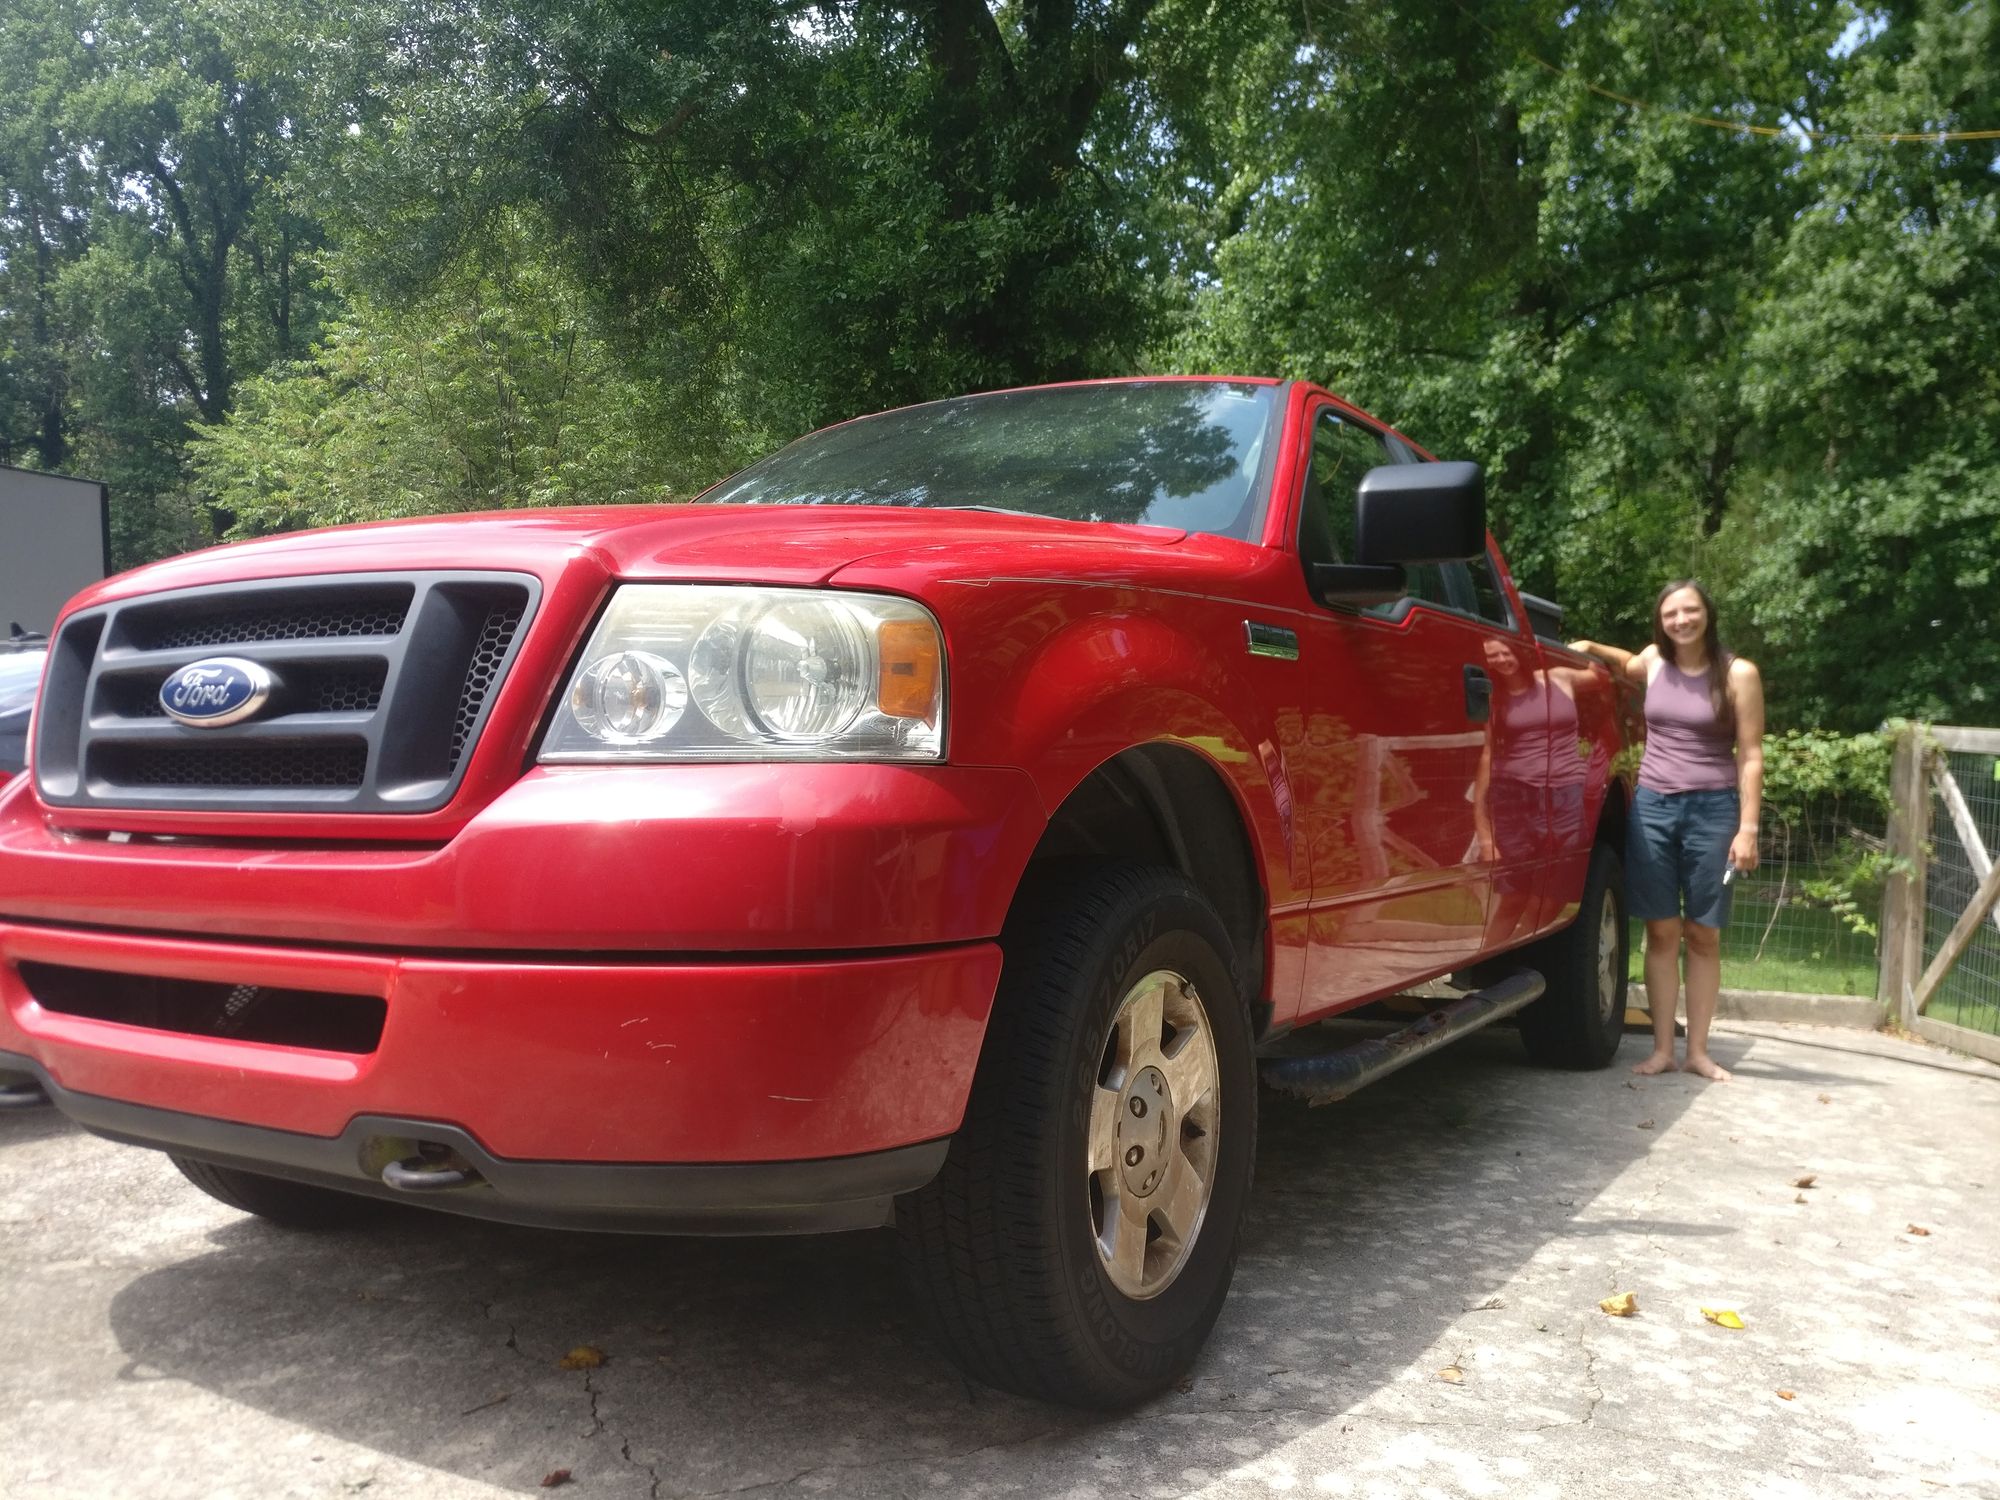 Clifford the Big Red Truck with guest blogger Corey Martin